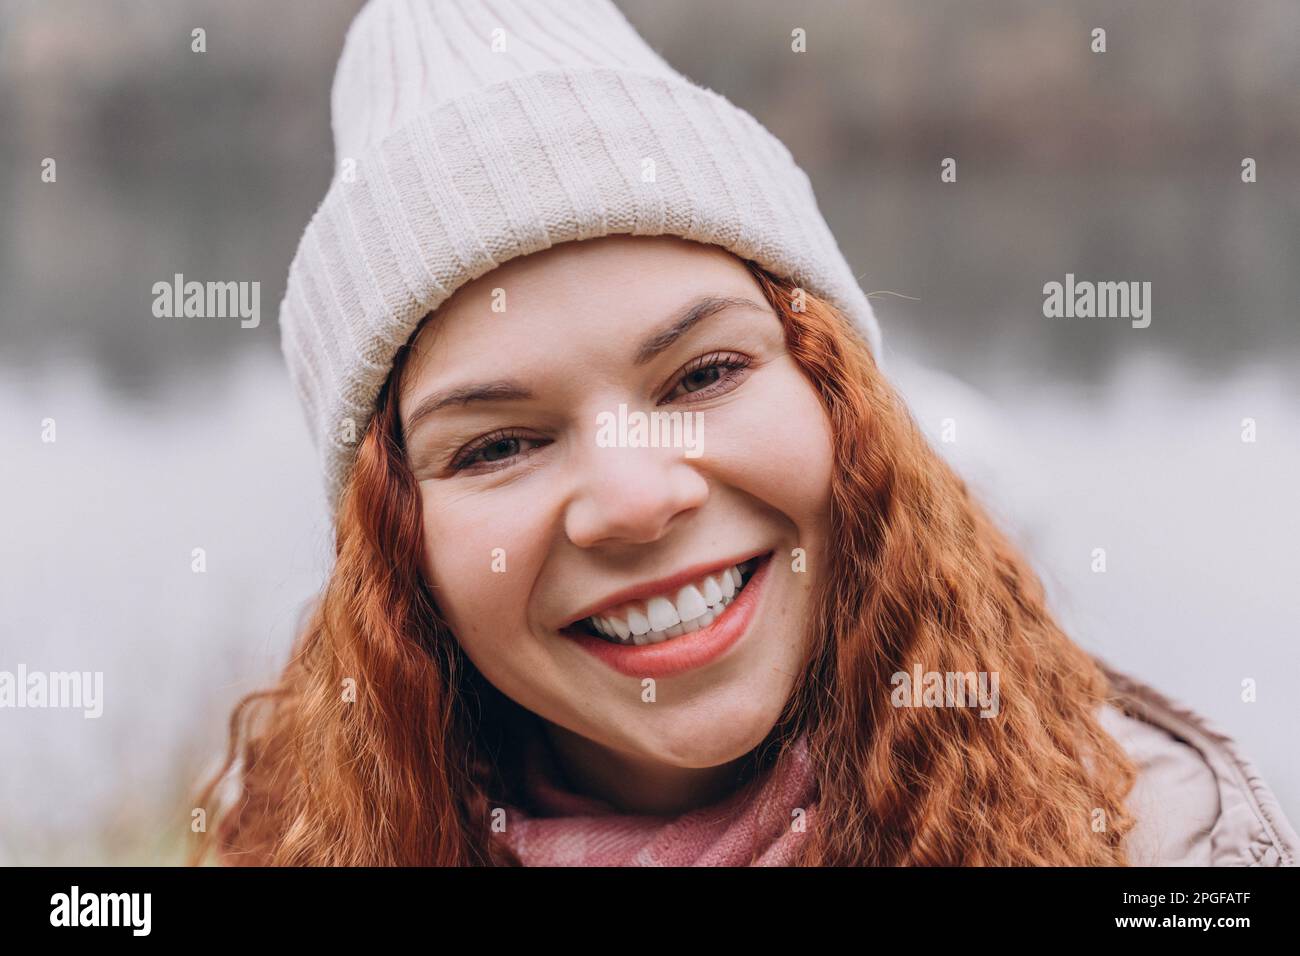 Curly redhead woman 30-35 in hat smiling Stock Photo